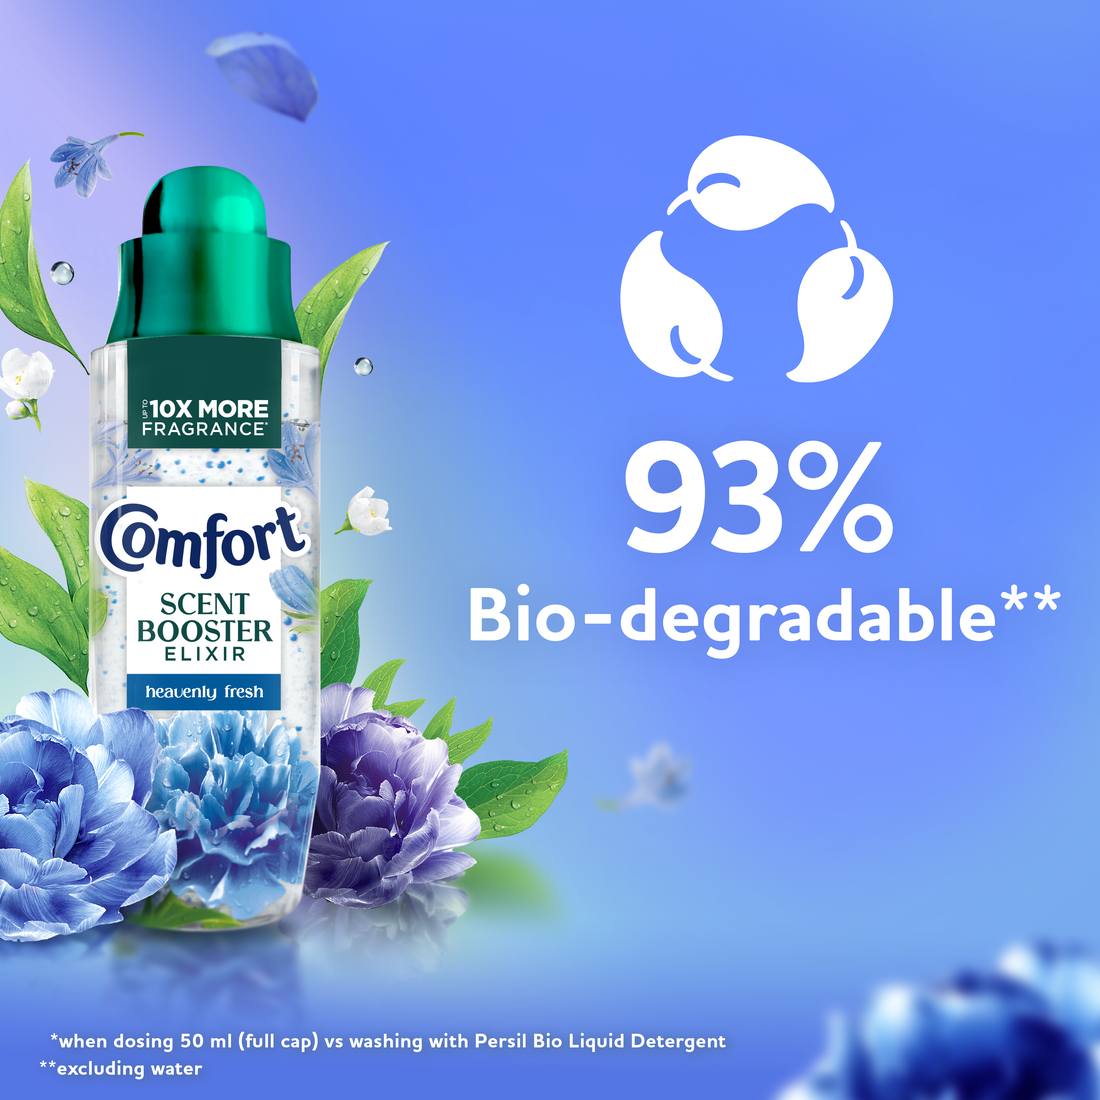 93% Bio-degradable

*when dosing 50ml (full cap) vs washing with Persil Bio Liquid Detergent
**excluding water